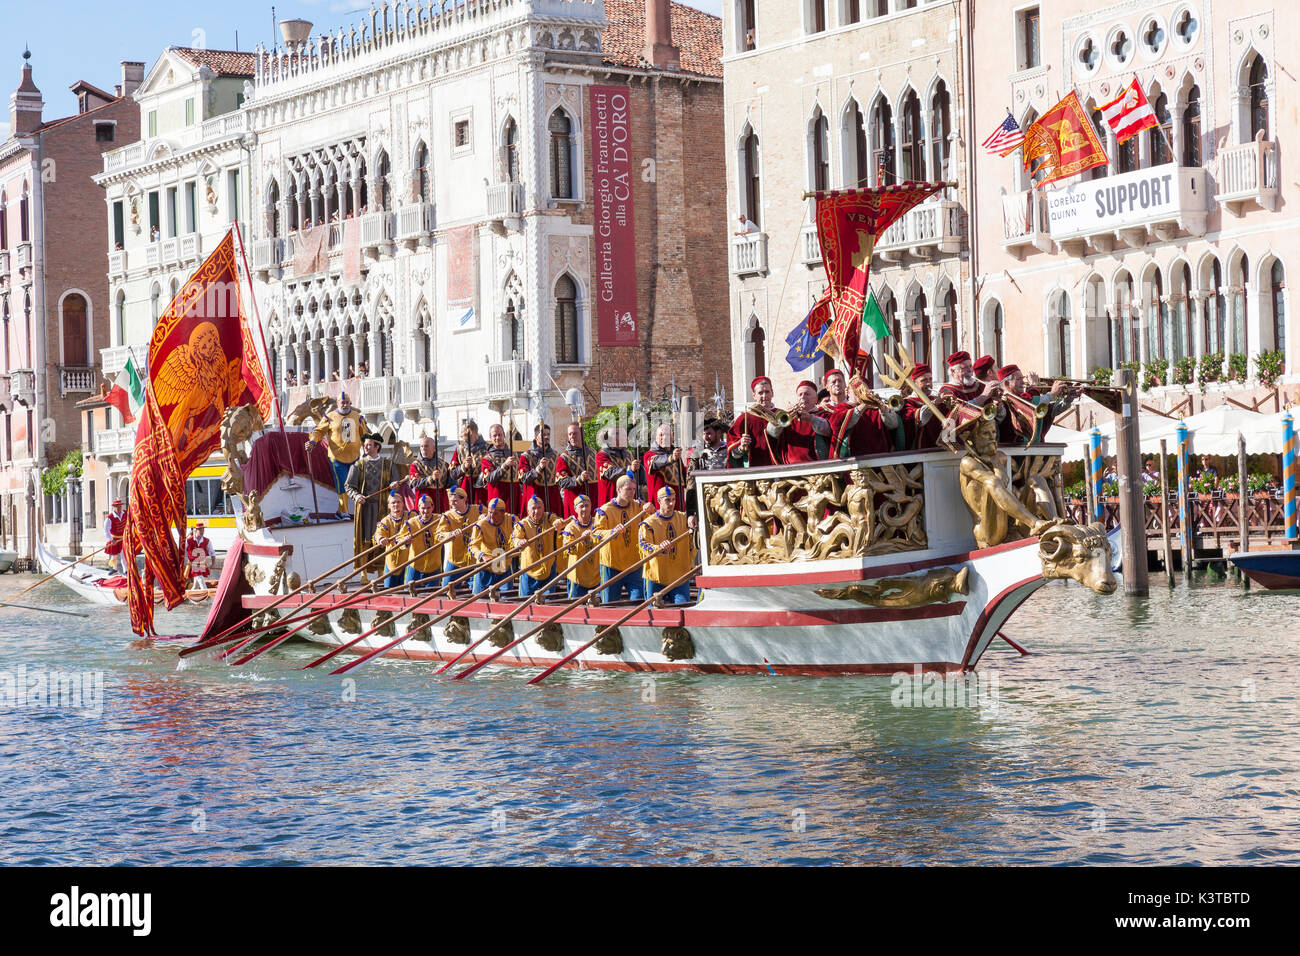 Venice, Veneto, Italy. 3rd September 2017. Boats participating in the Regata Storica, a re-enactment of a historical procession of boats carrying the Doge and highest ranking Venetian officials  in 1489 to welcome Caterina Cornaro, the wife of the King of Cyprus, who renounced her throne in favour of Venice. The procession is followed by  important  annual rowing regattas, the highlight of the Venice rowing season. Stock Photo